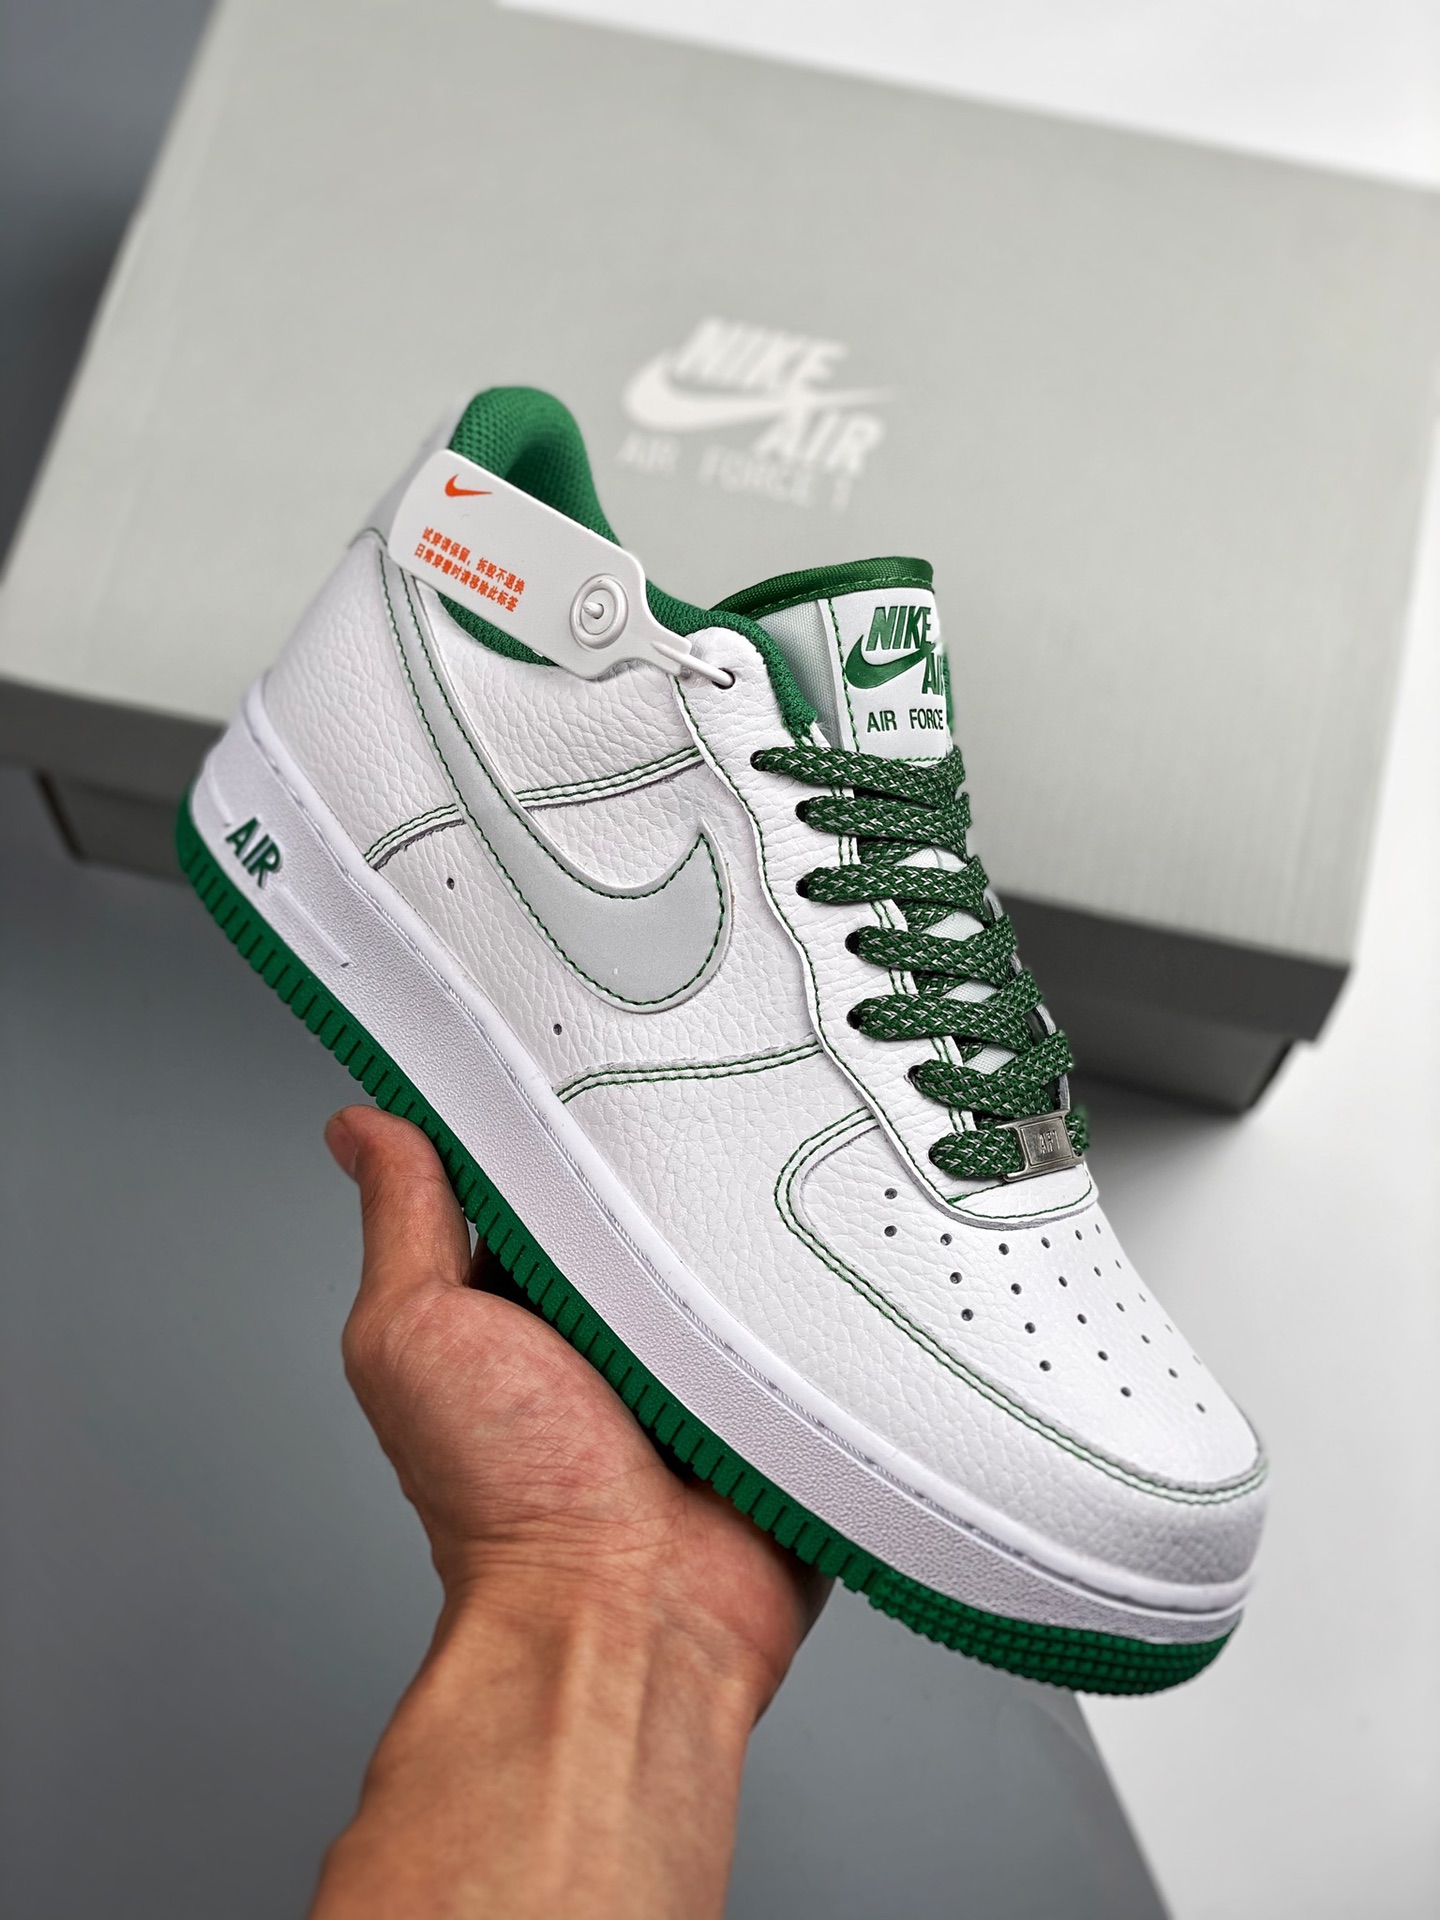 Nike Air Force 1 Low White/White-Pine Green For Sale – Sneaker Hello